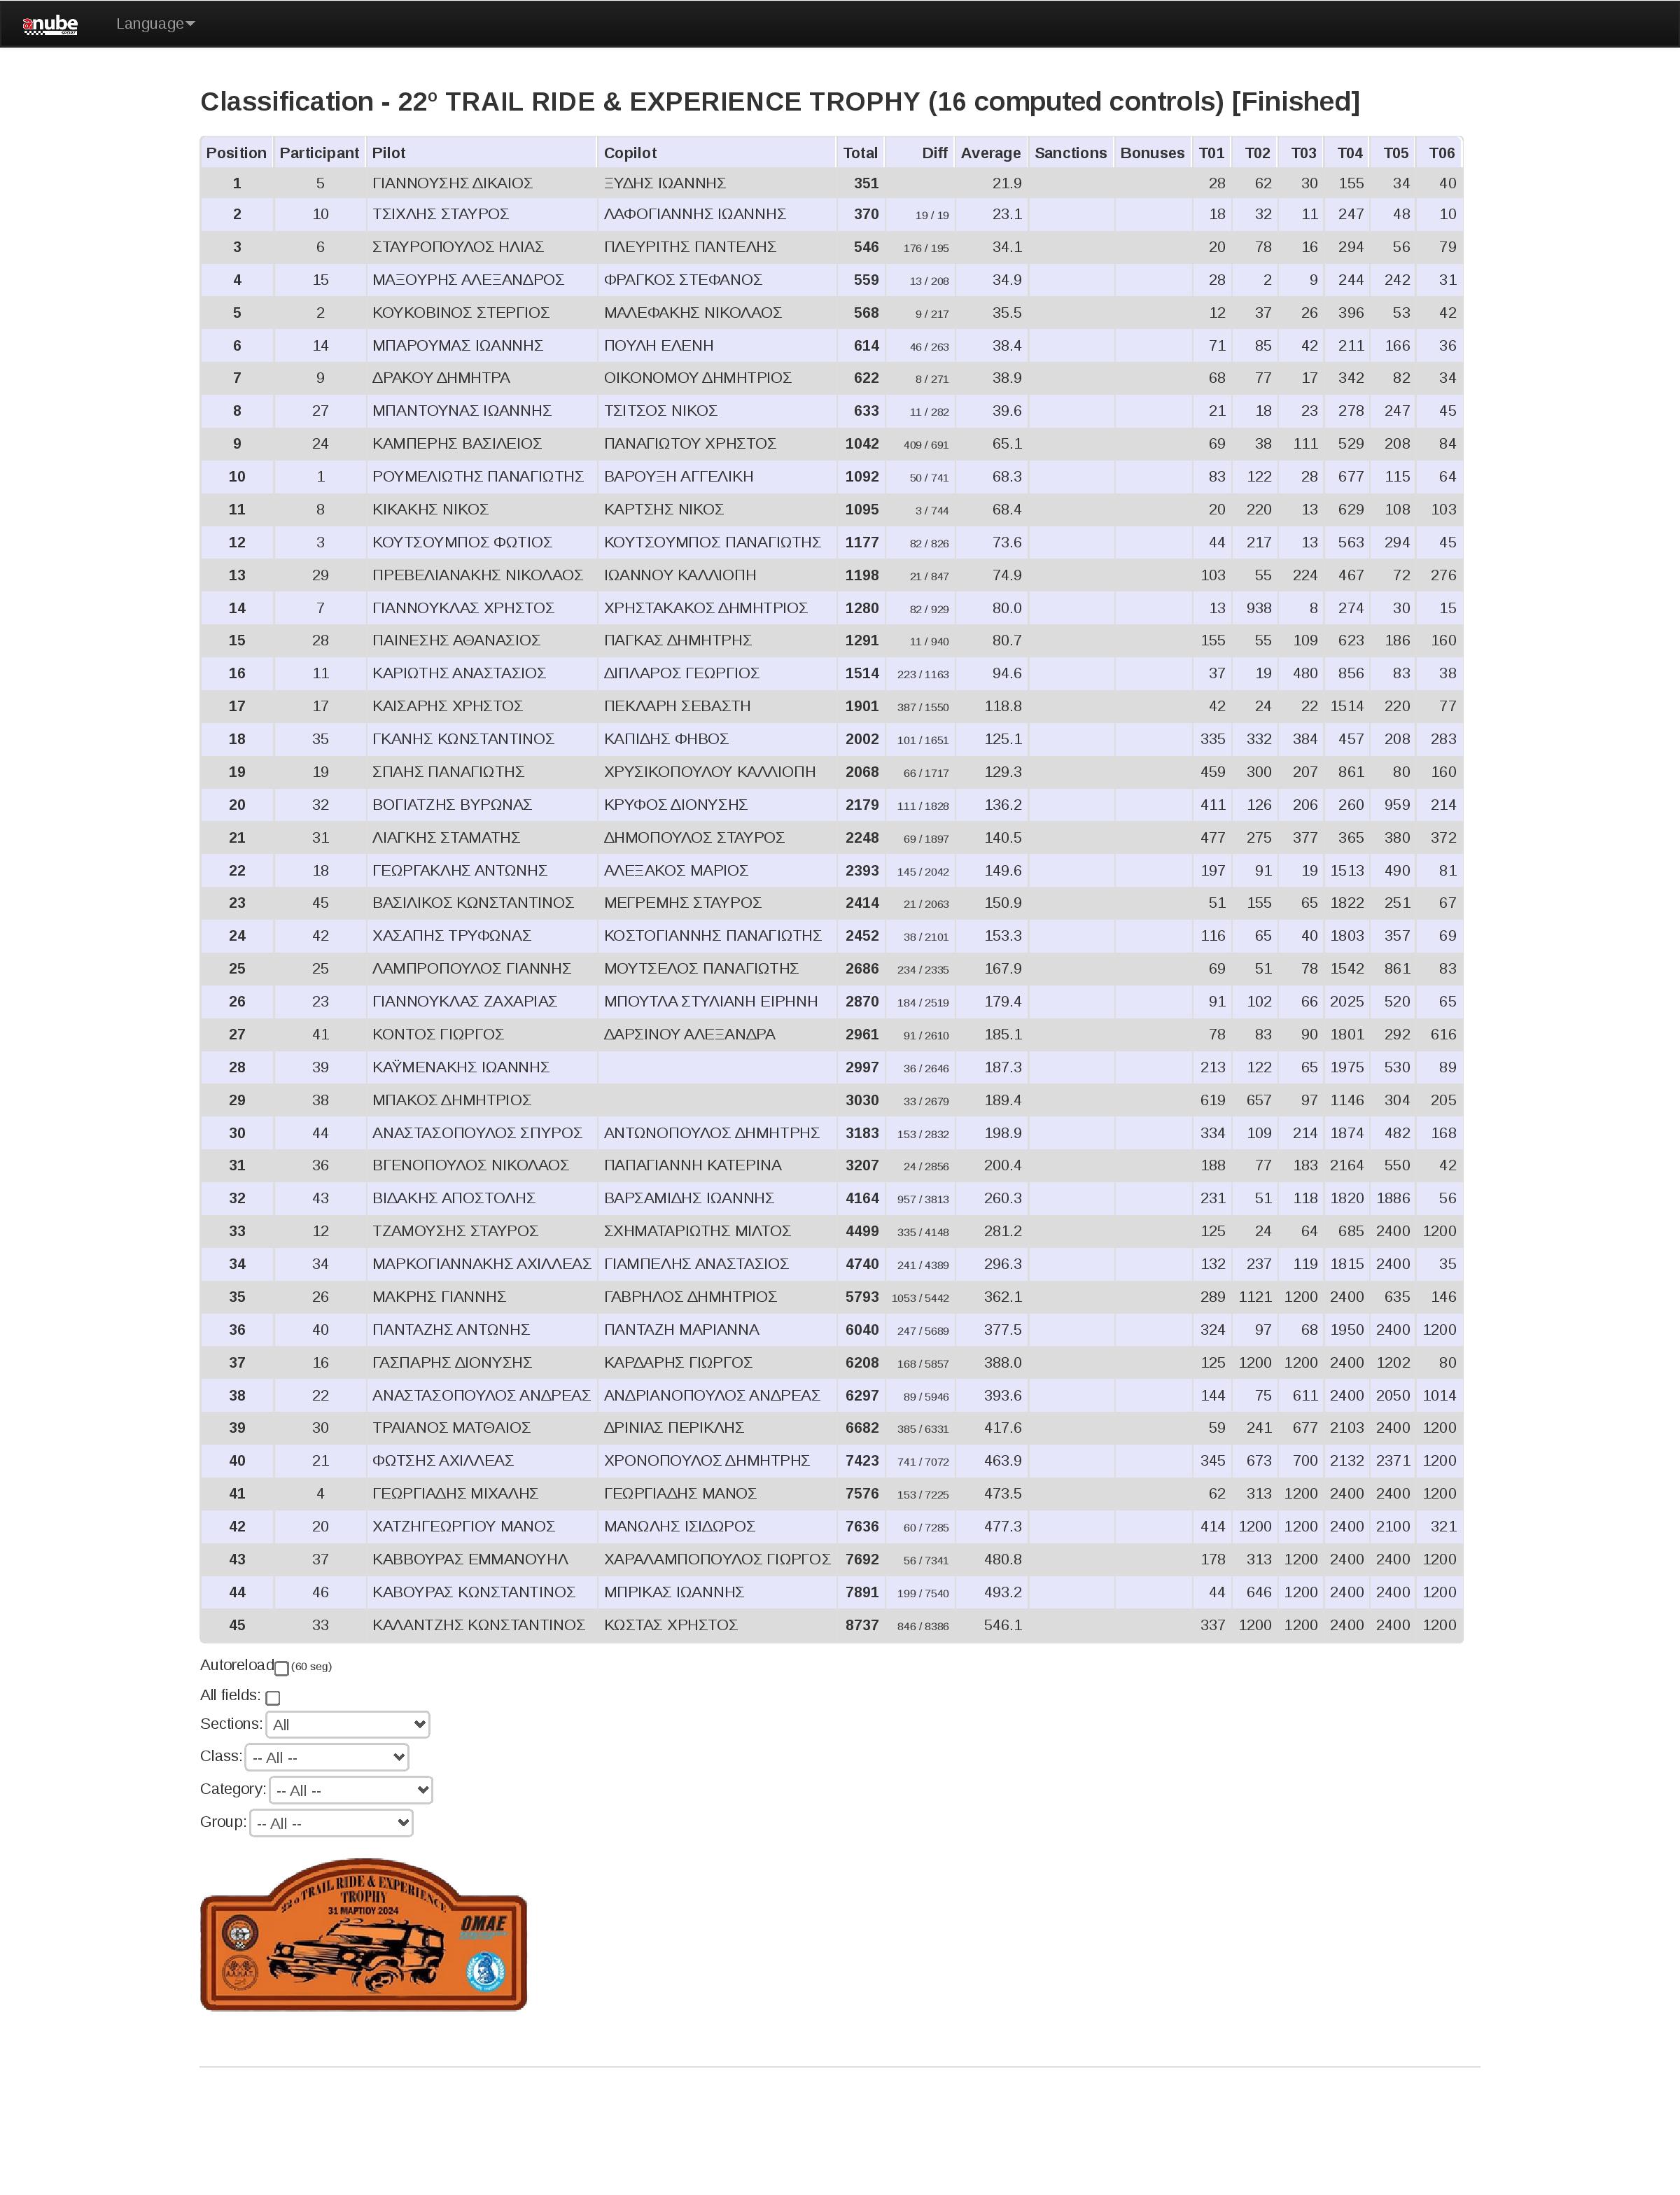 times anube es rallies classic clasificacion 5903 page 001